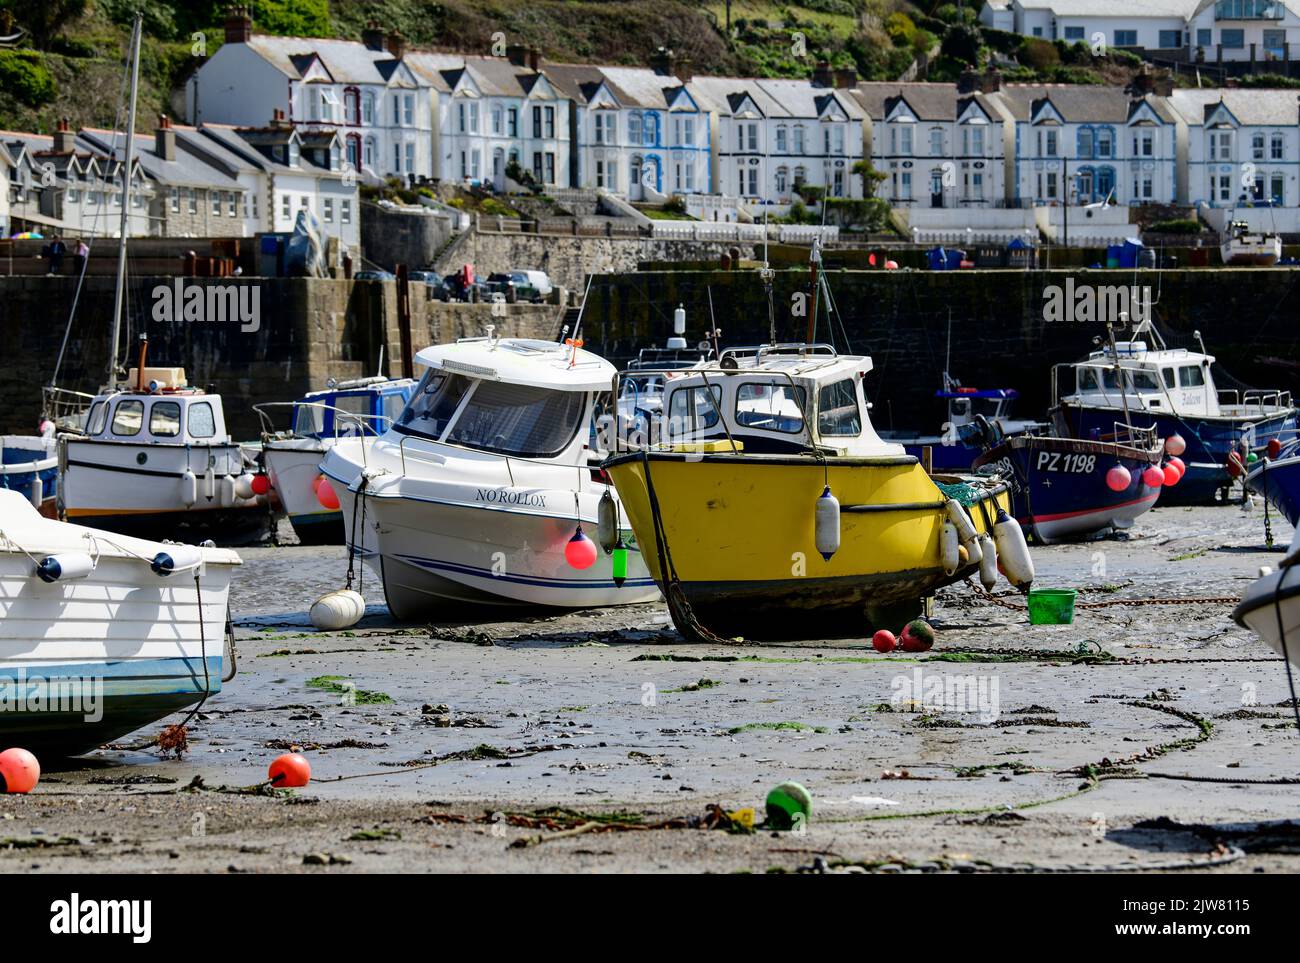 The beautiful fishing village of Porthleven. Viewing the harbour and its fishing's boats. Stock Photo